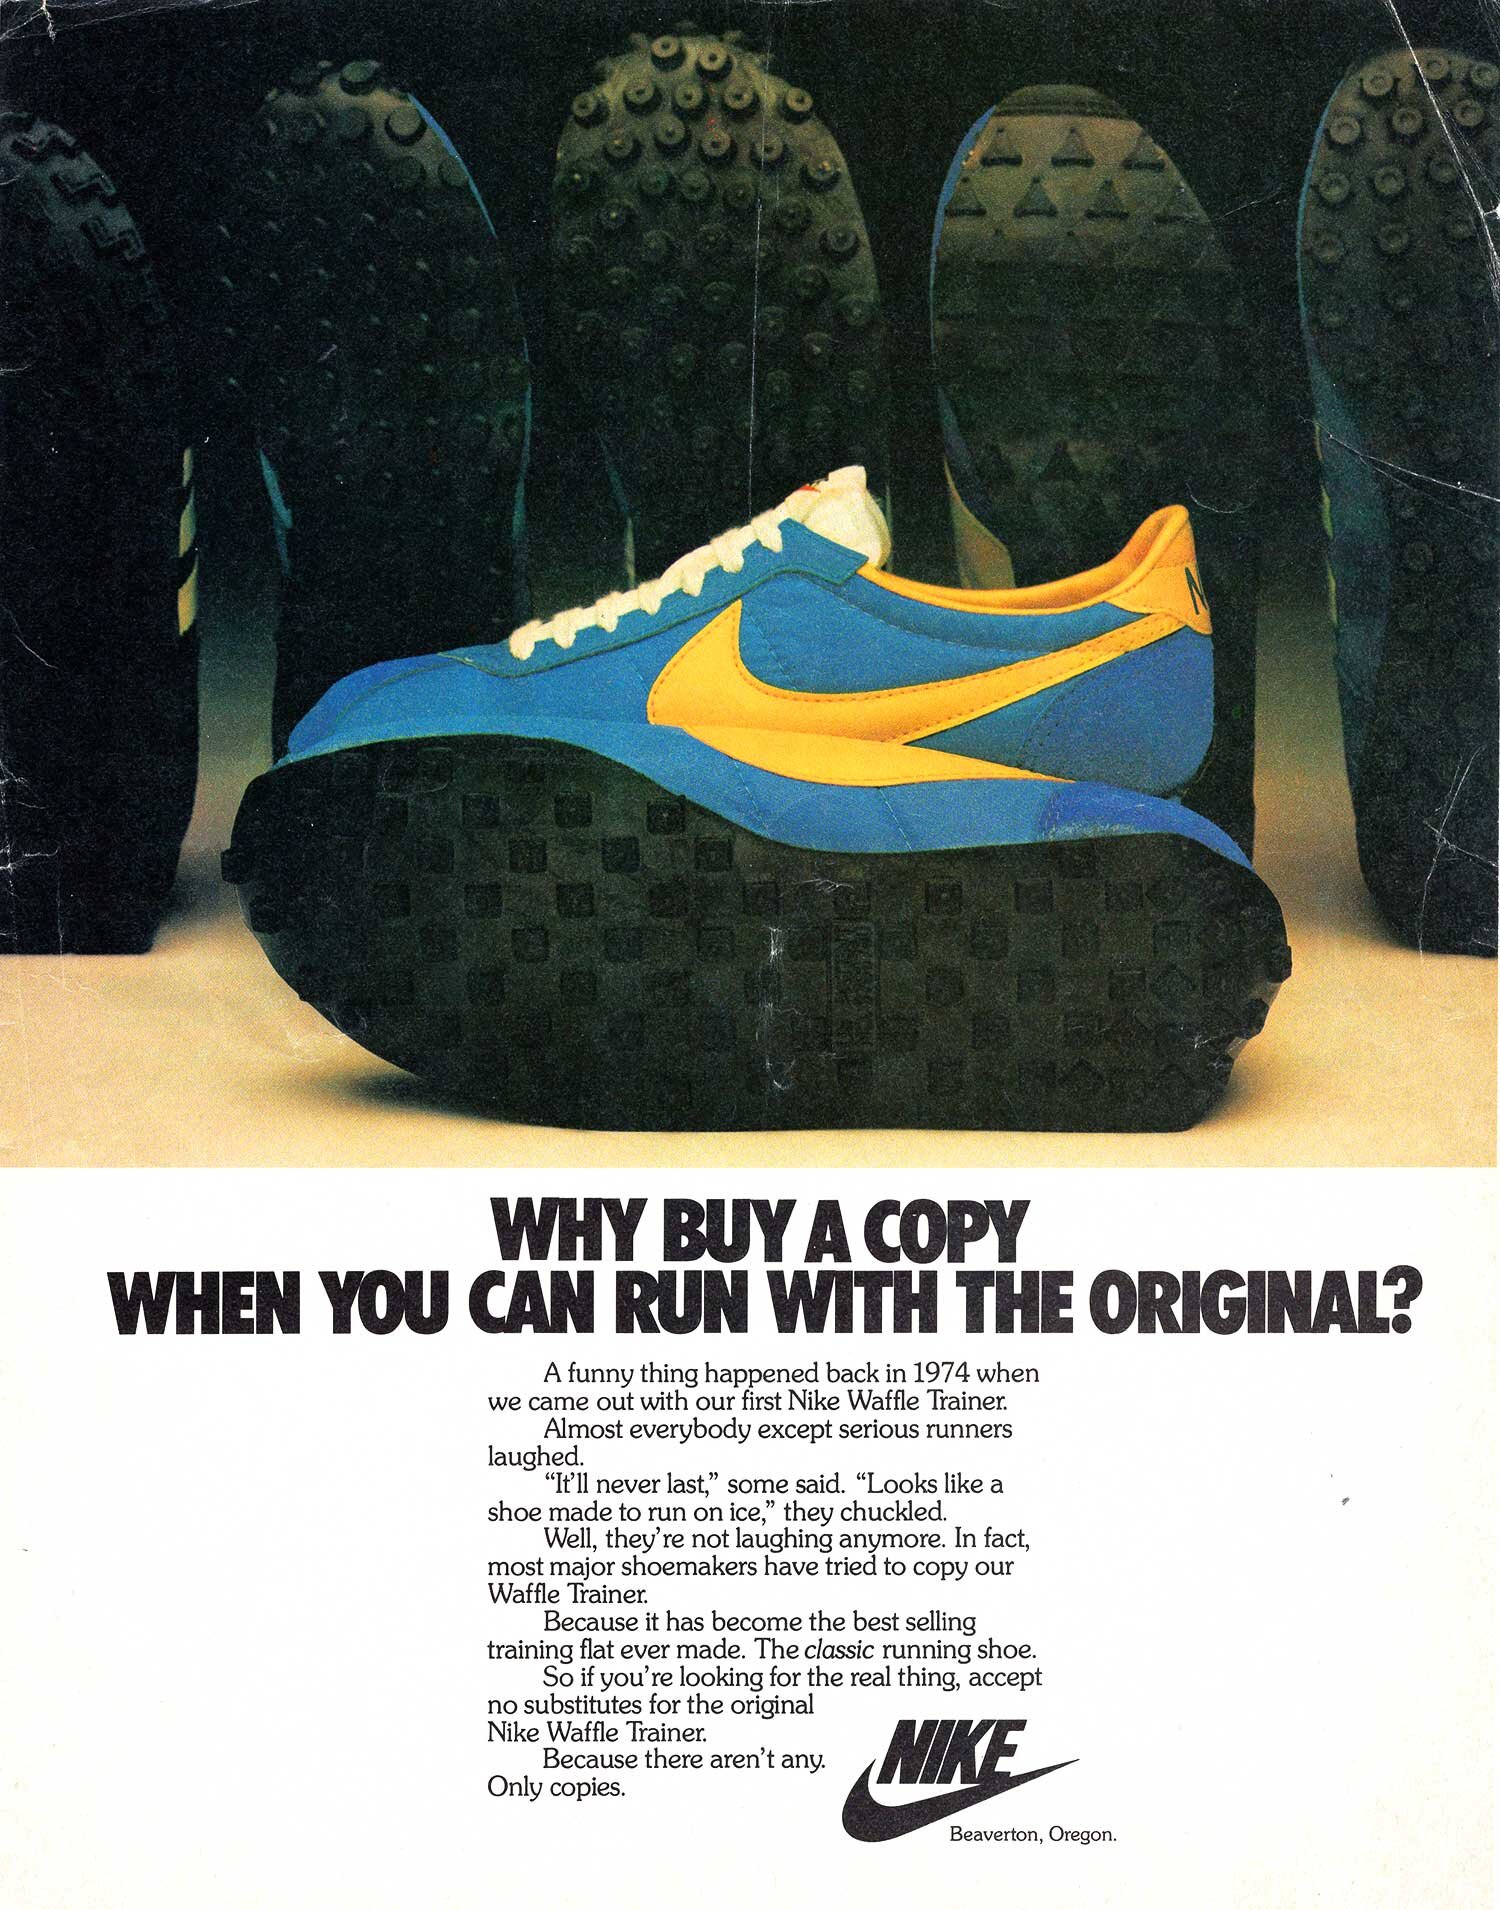 The Deffest®. A vintage and retro sneaker blog. — Nike Waffle Trainer vintage sneaker ad